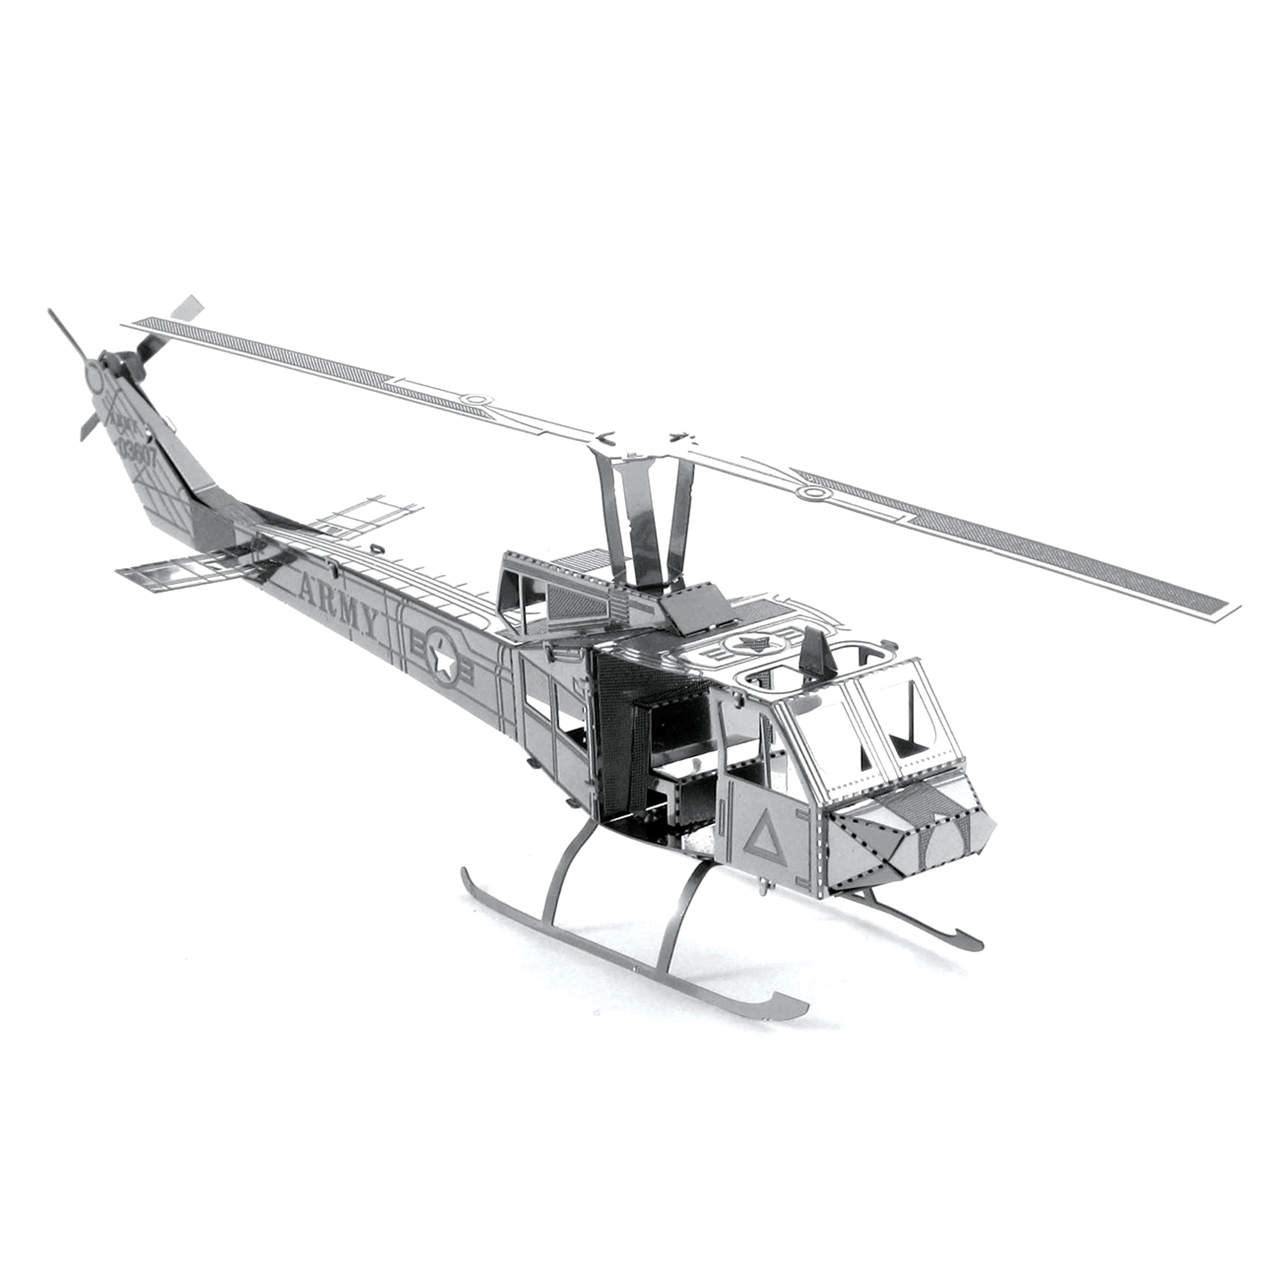 METAL HUEY HELICOPTER MODEL 3D CRAFT KIT CHRISTMAS GIFT IDEA UK STOCK FAST POST 